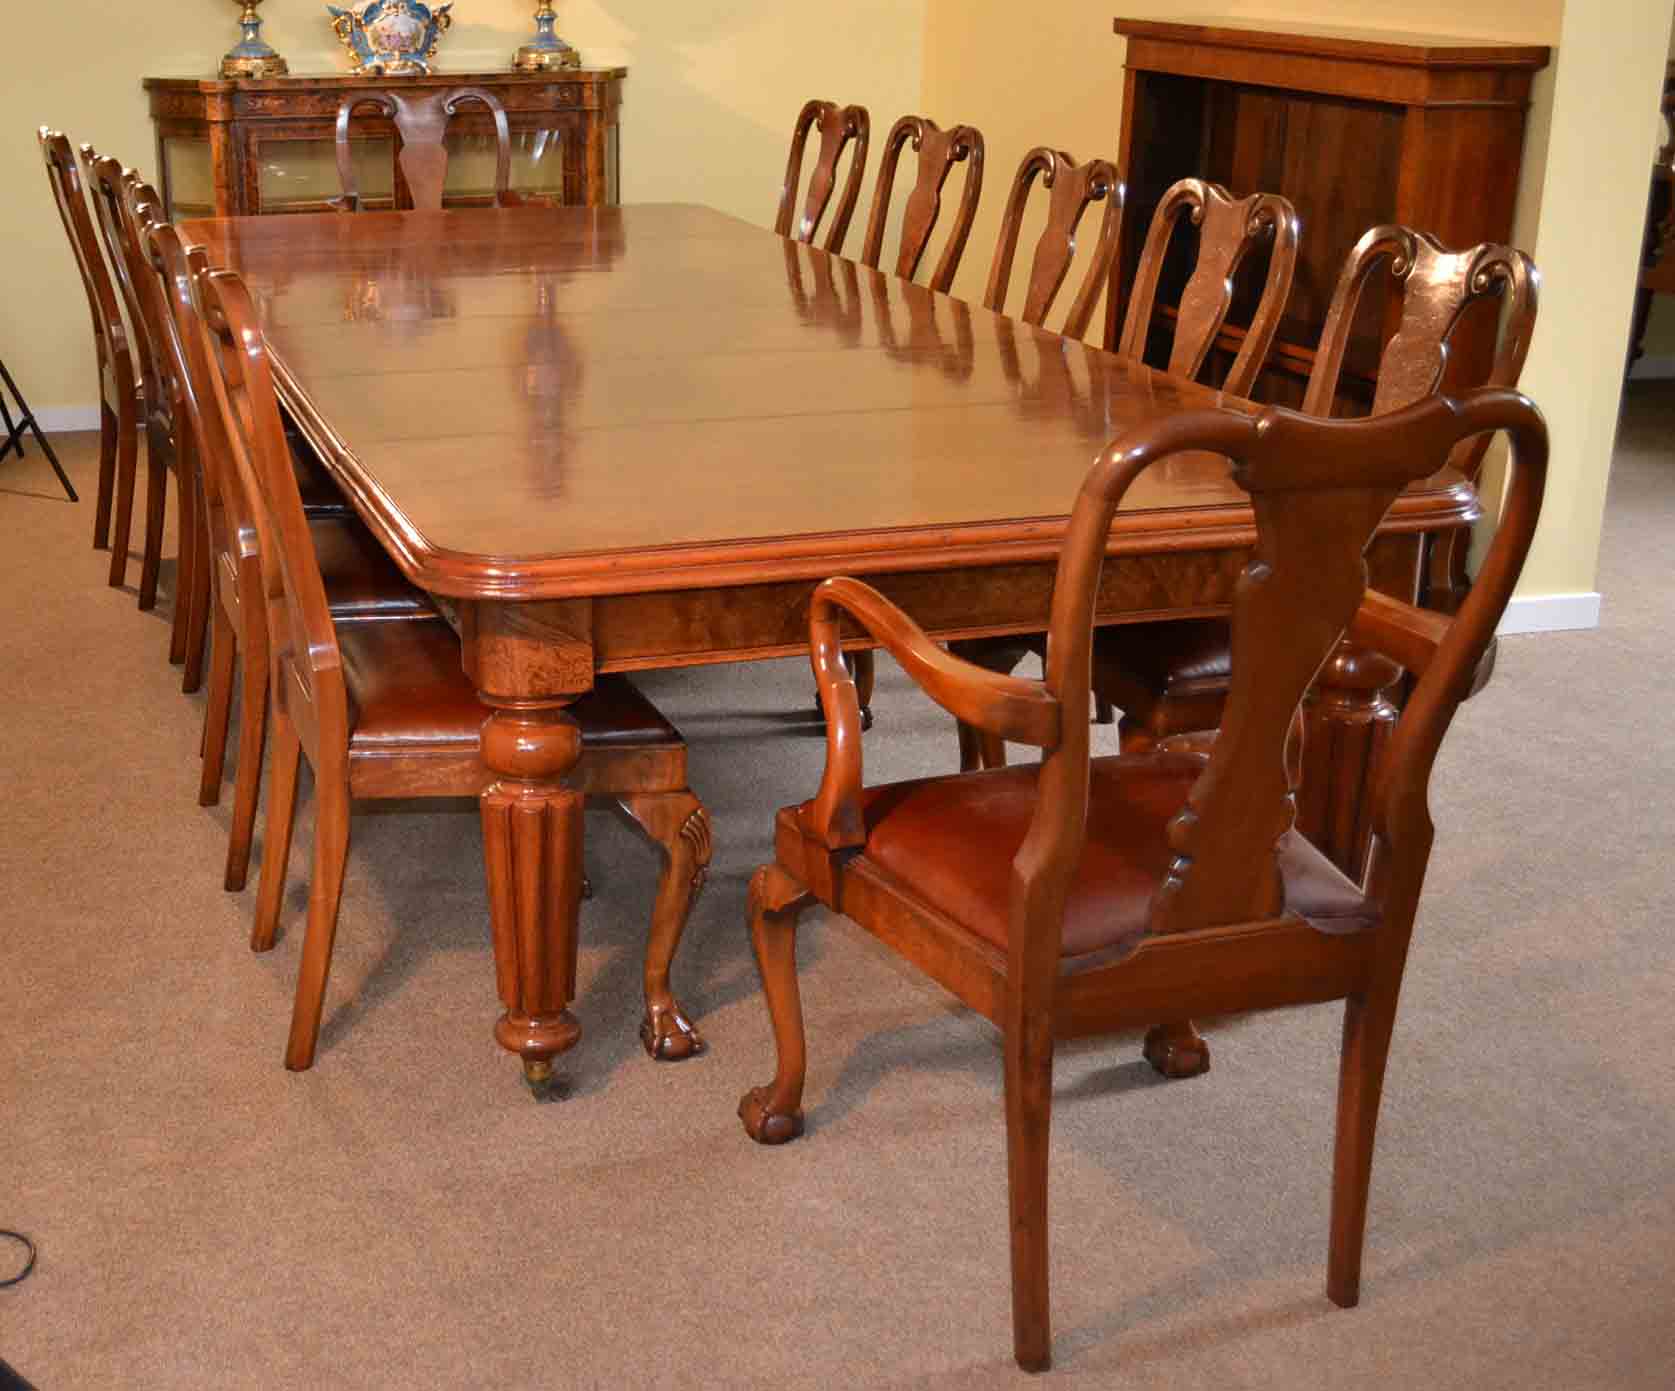 Antique Used Dining Room Table And Chairs Ebay